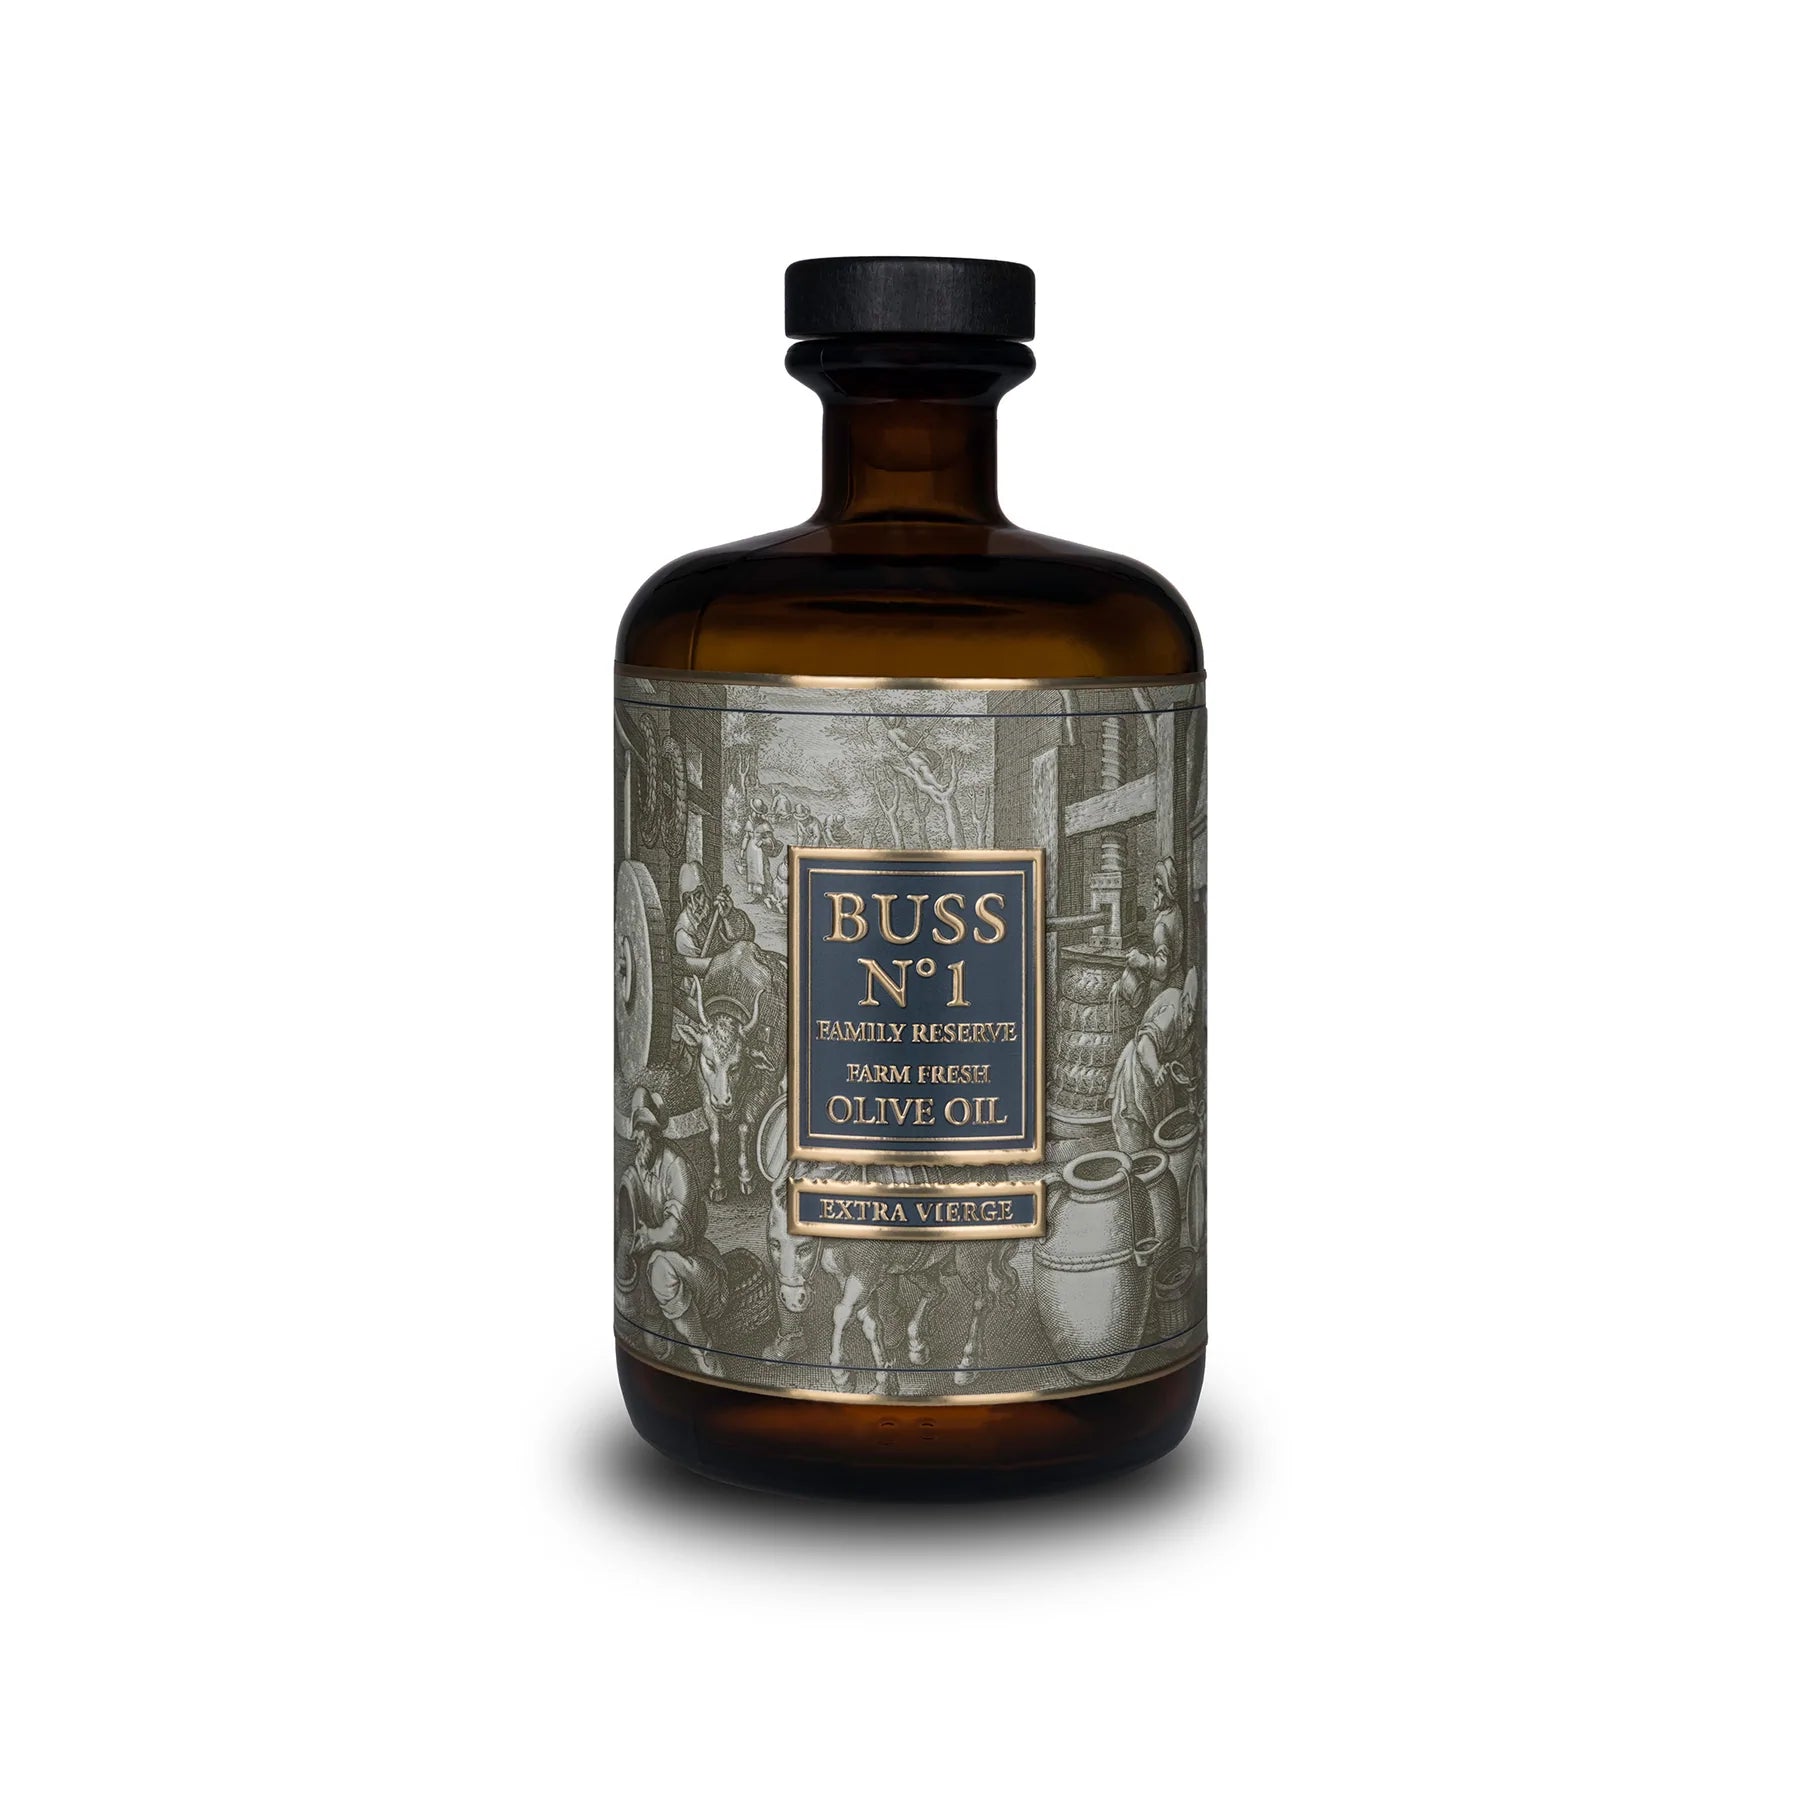 BUSS N°1 Extra Vierge Olive Oil 700 ml - Bottle Only